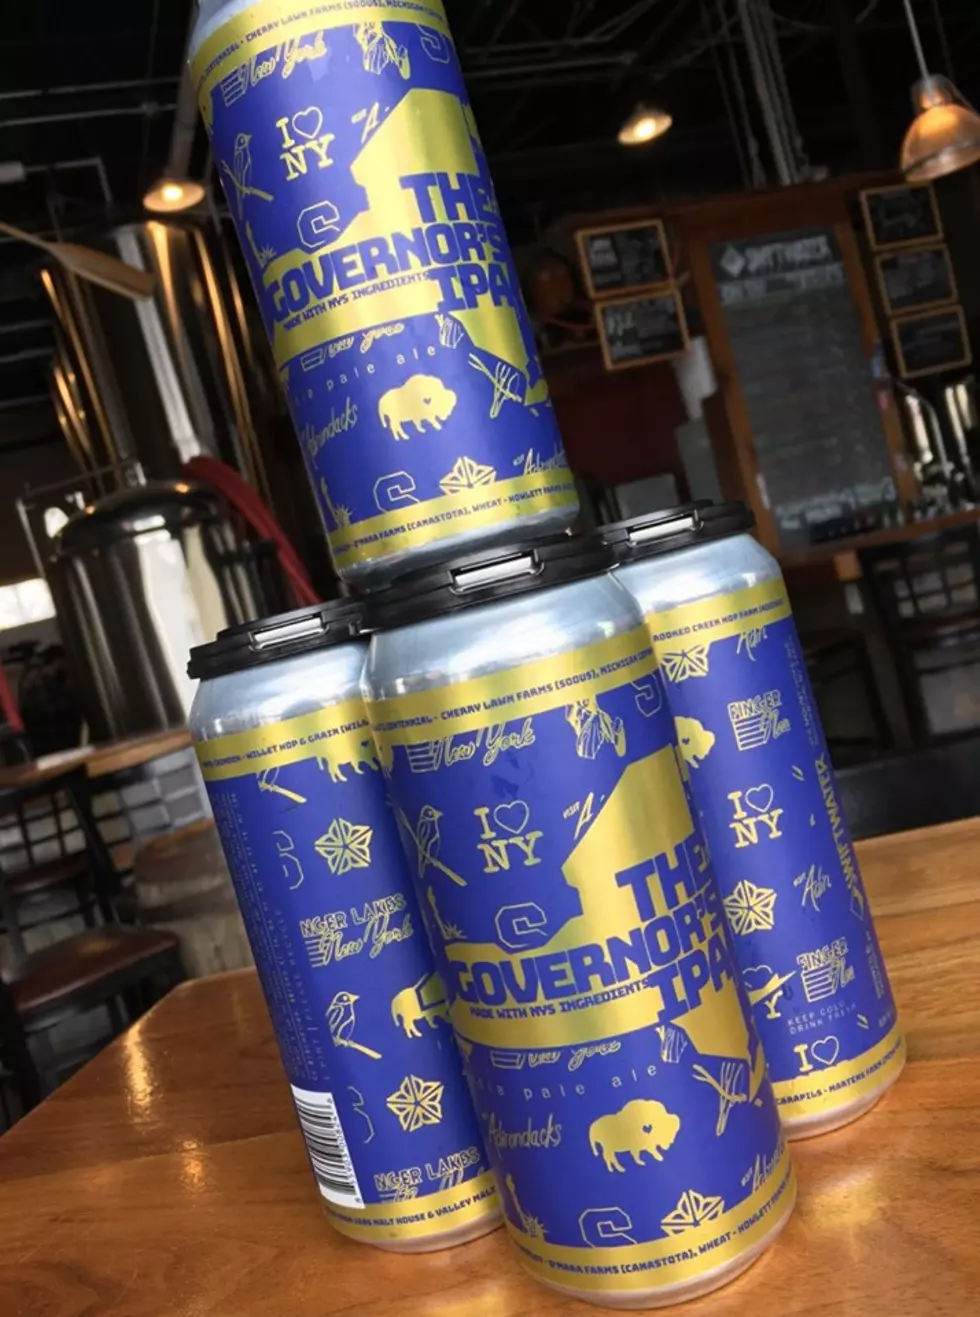 Governor Cuomo Gets His Own Beer at Rochester Brewery